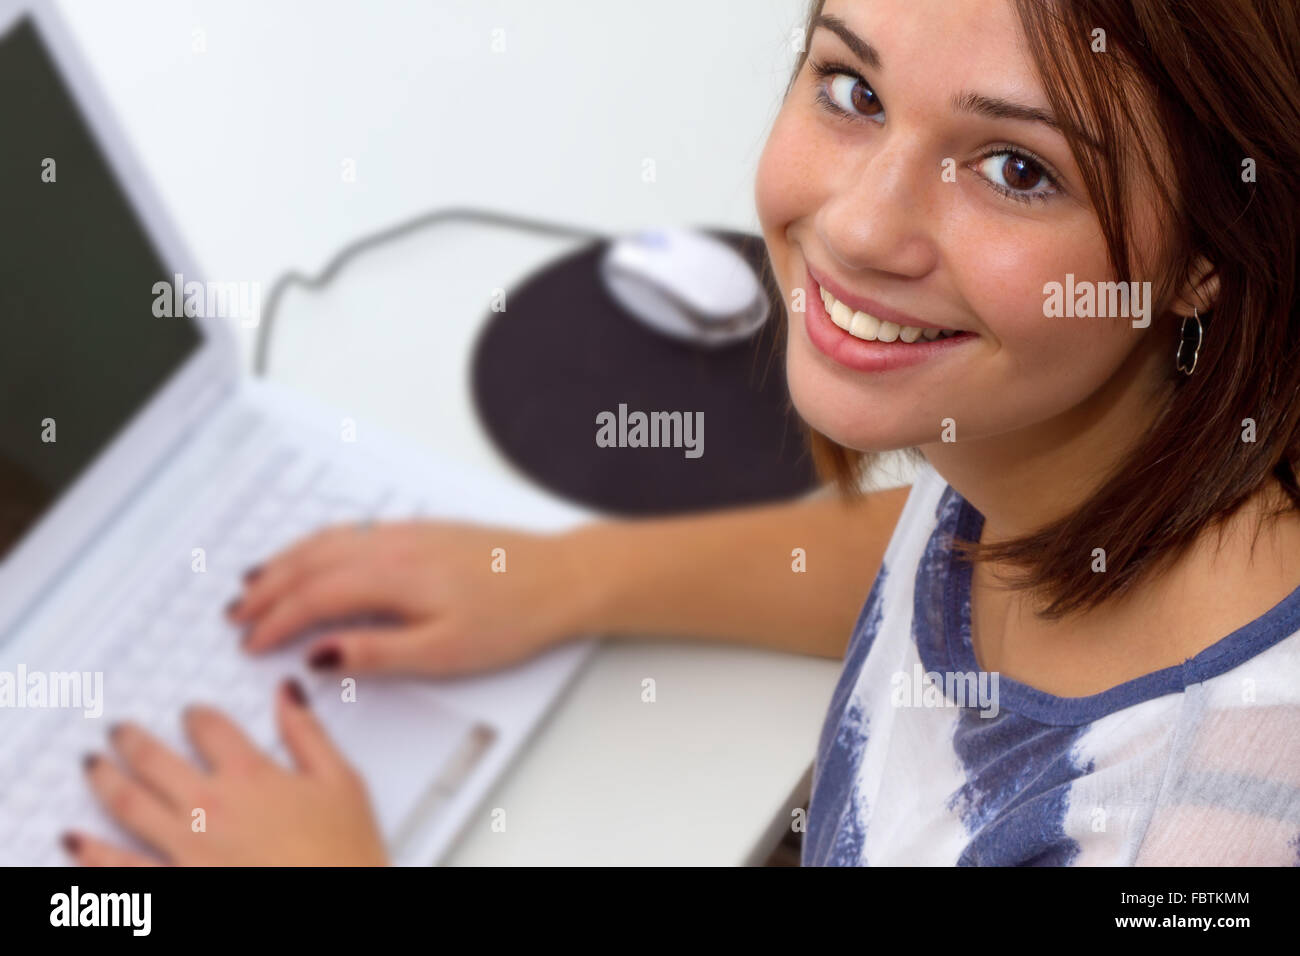 Young gril using laptop computer Stock Photo